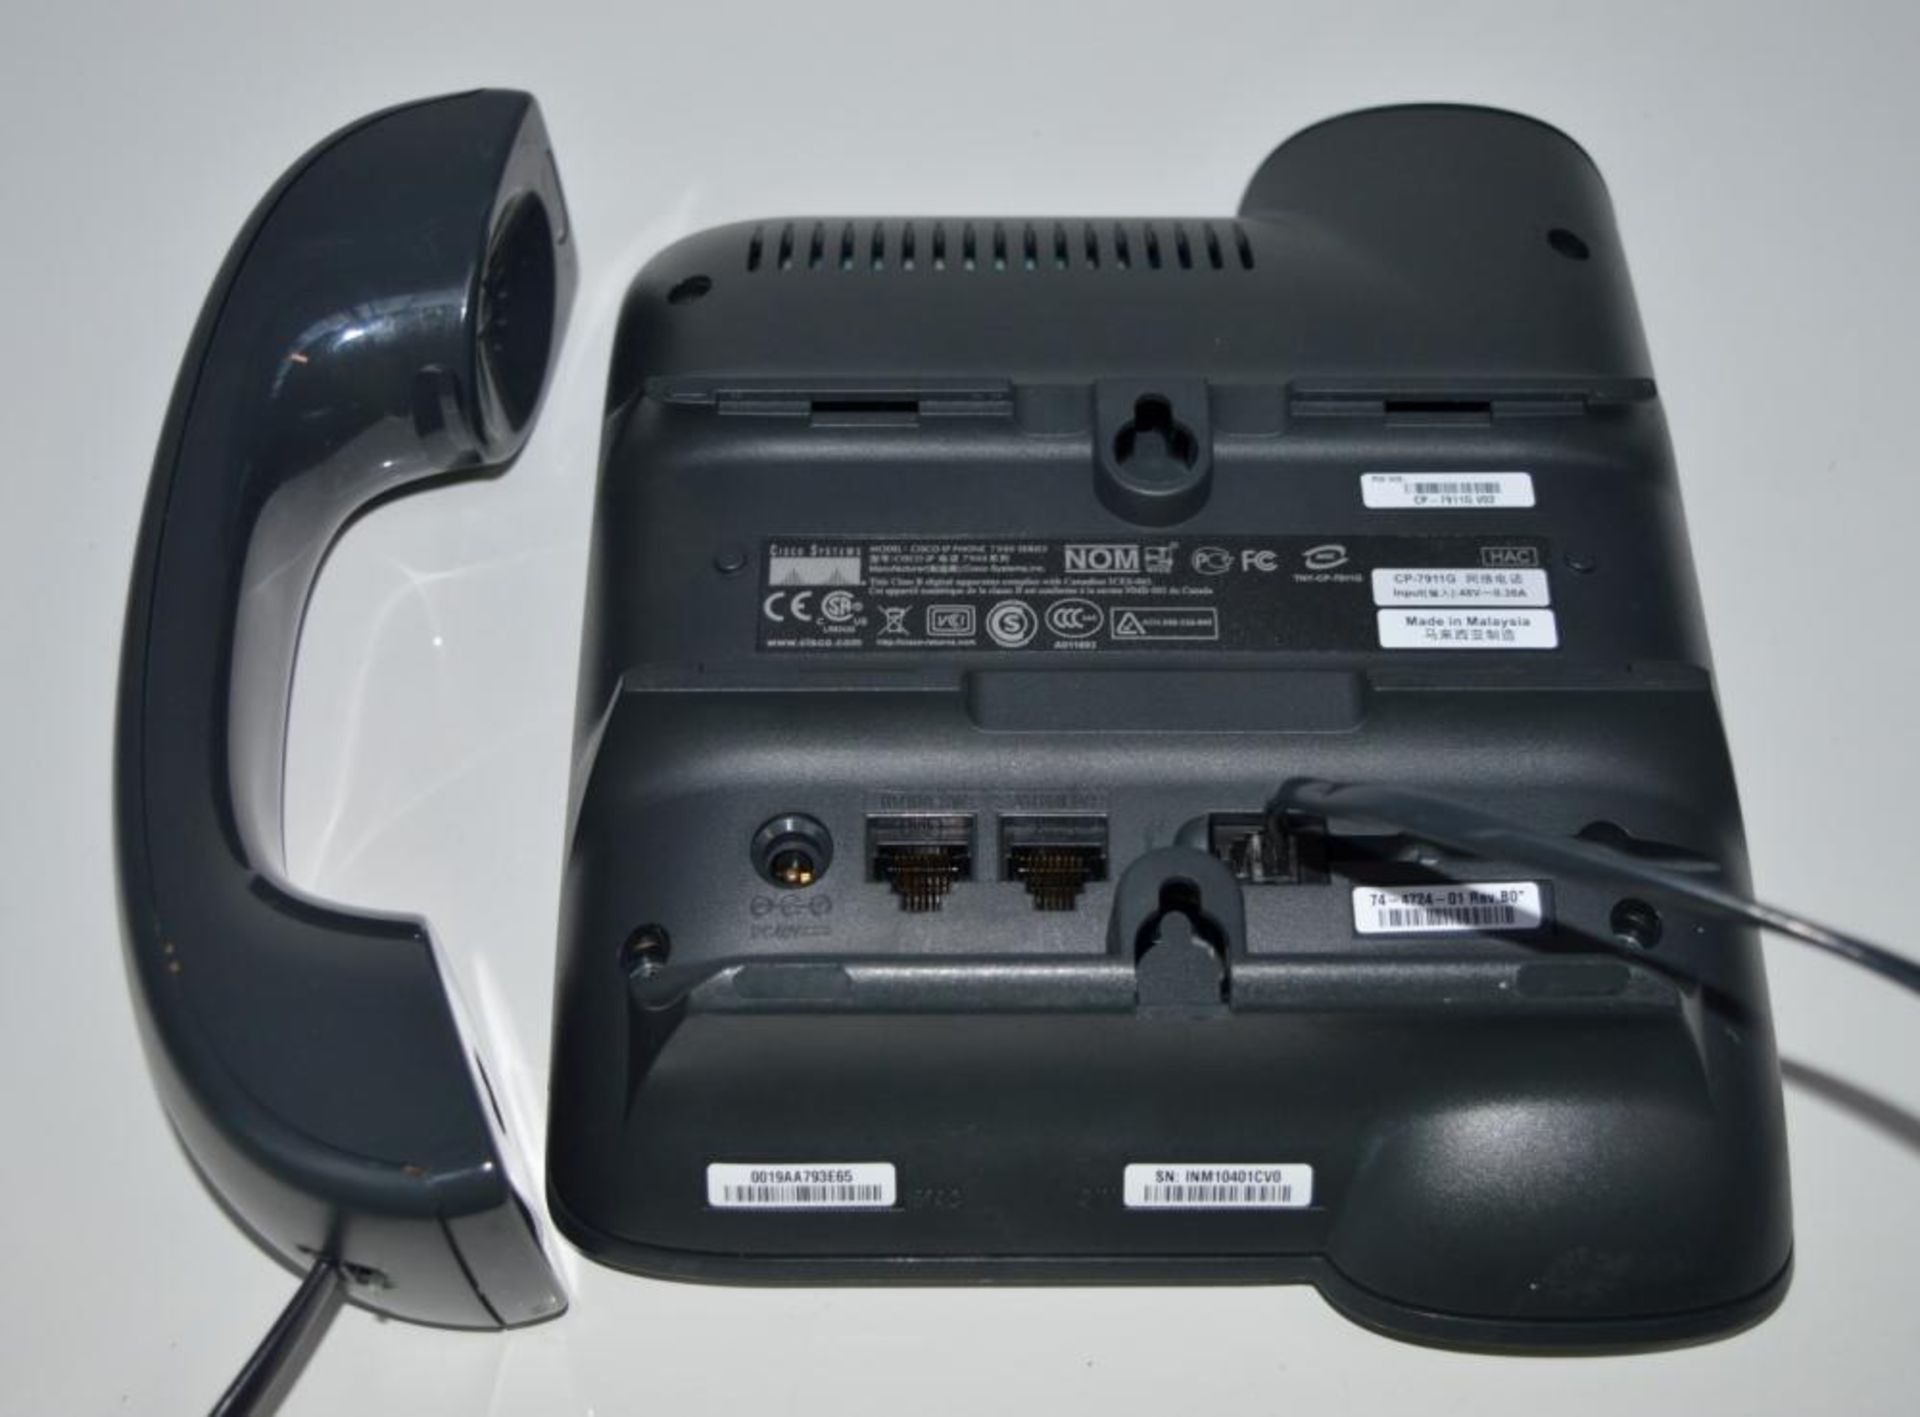 4 x Cisco CP-7911G Unified IP SIP Phones - Removed From a Working Office Environment in Good - Image 4 of 8